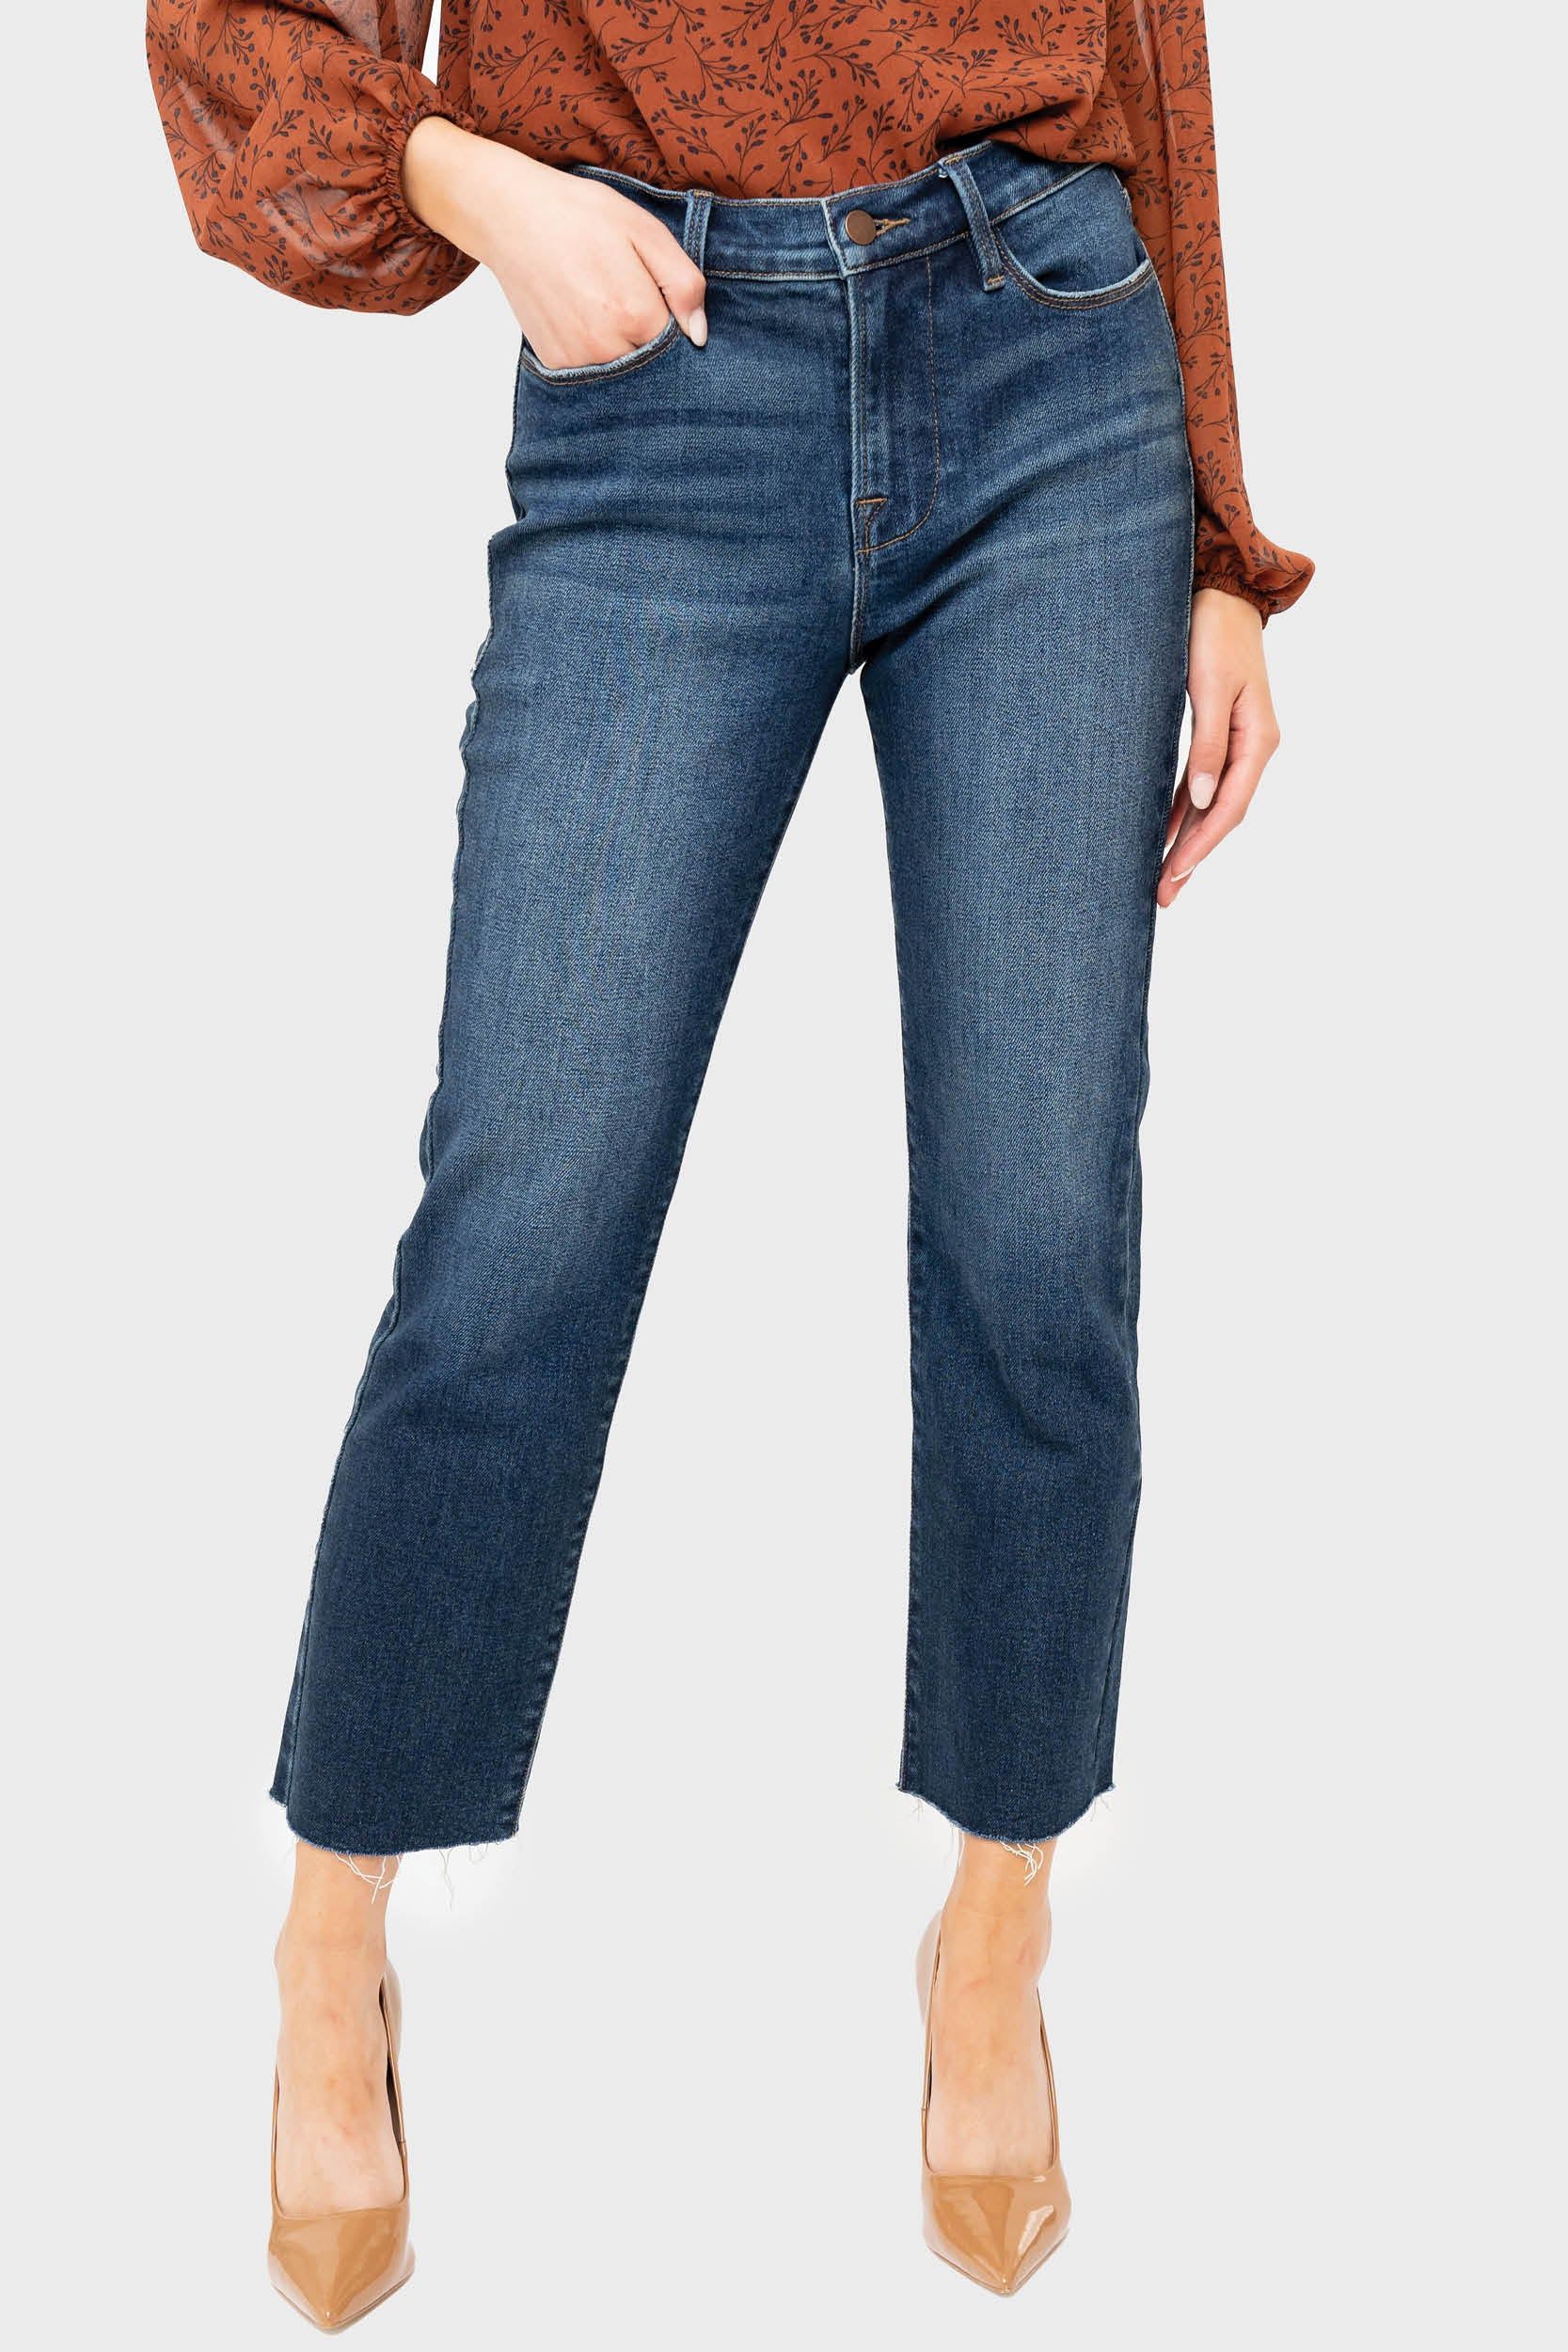 Denim Cropped Flare Pant | Gibson